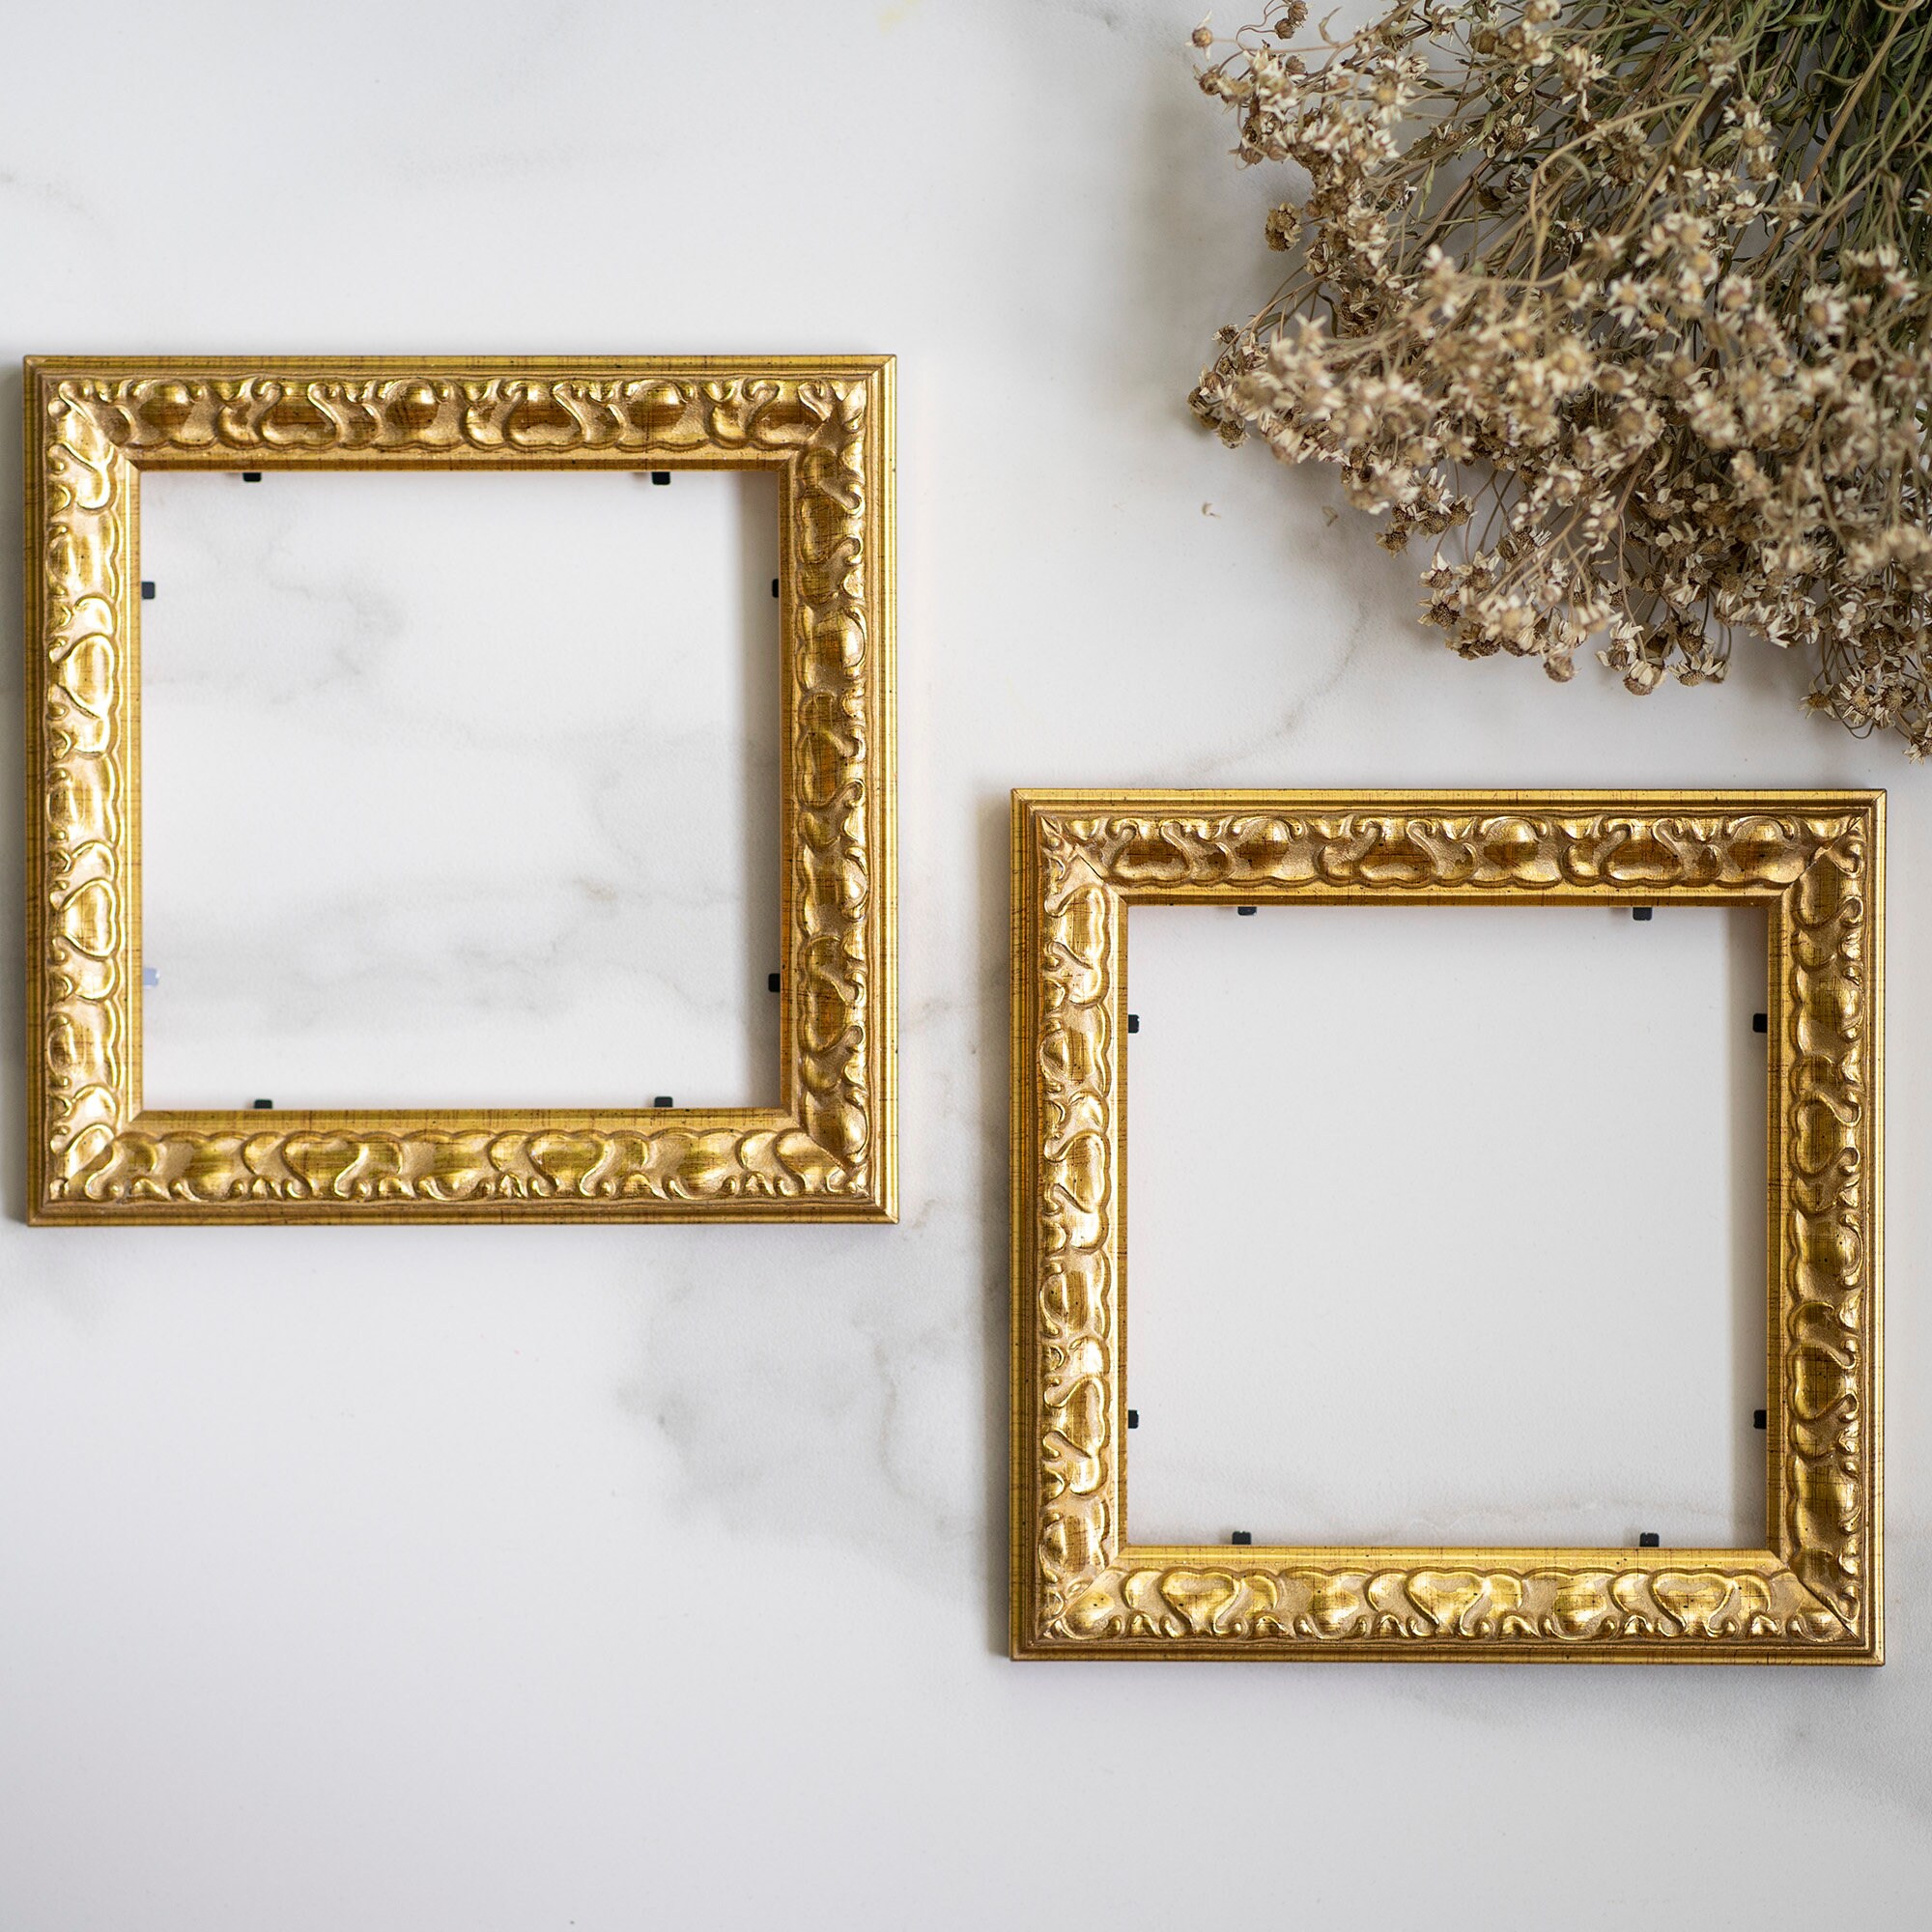 Gold Ornate 6x6 Picture Frame 6x6 Frame 6 x 6 Photo Frames 6 x 6 Square